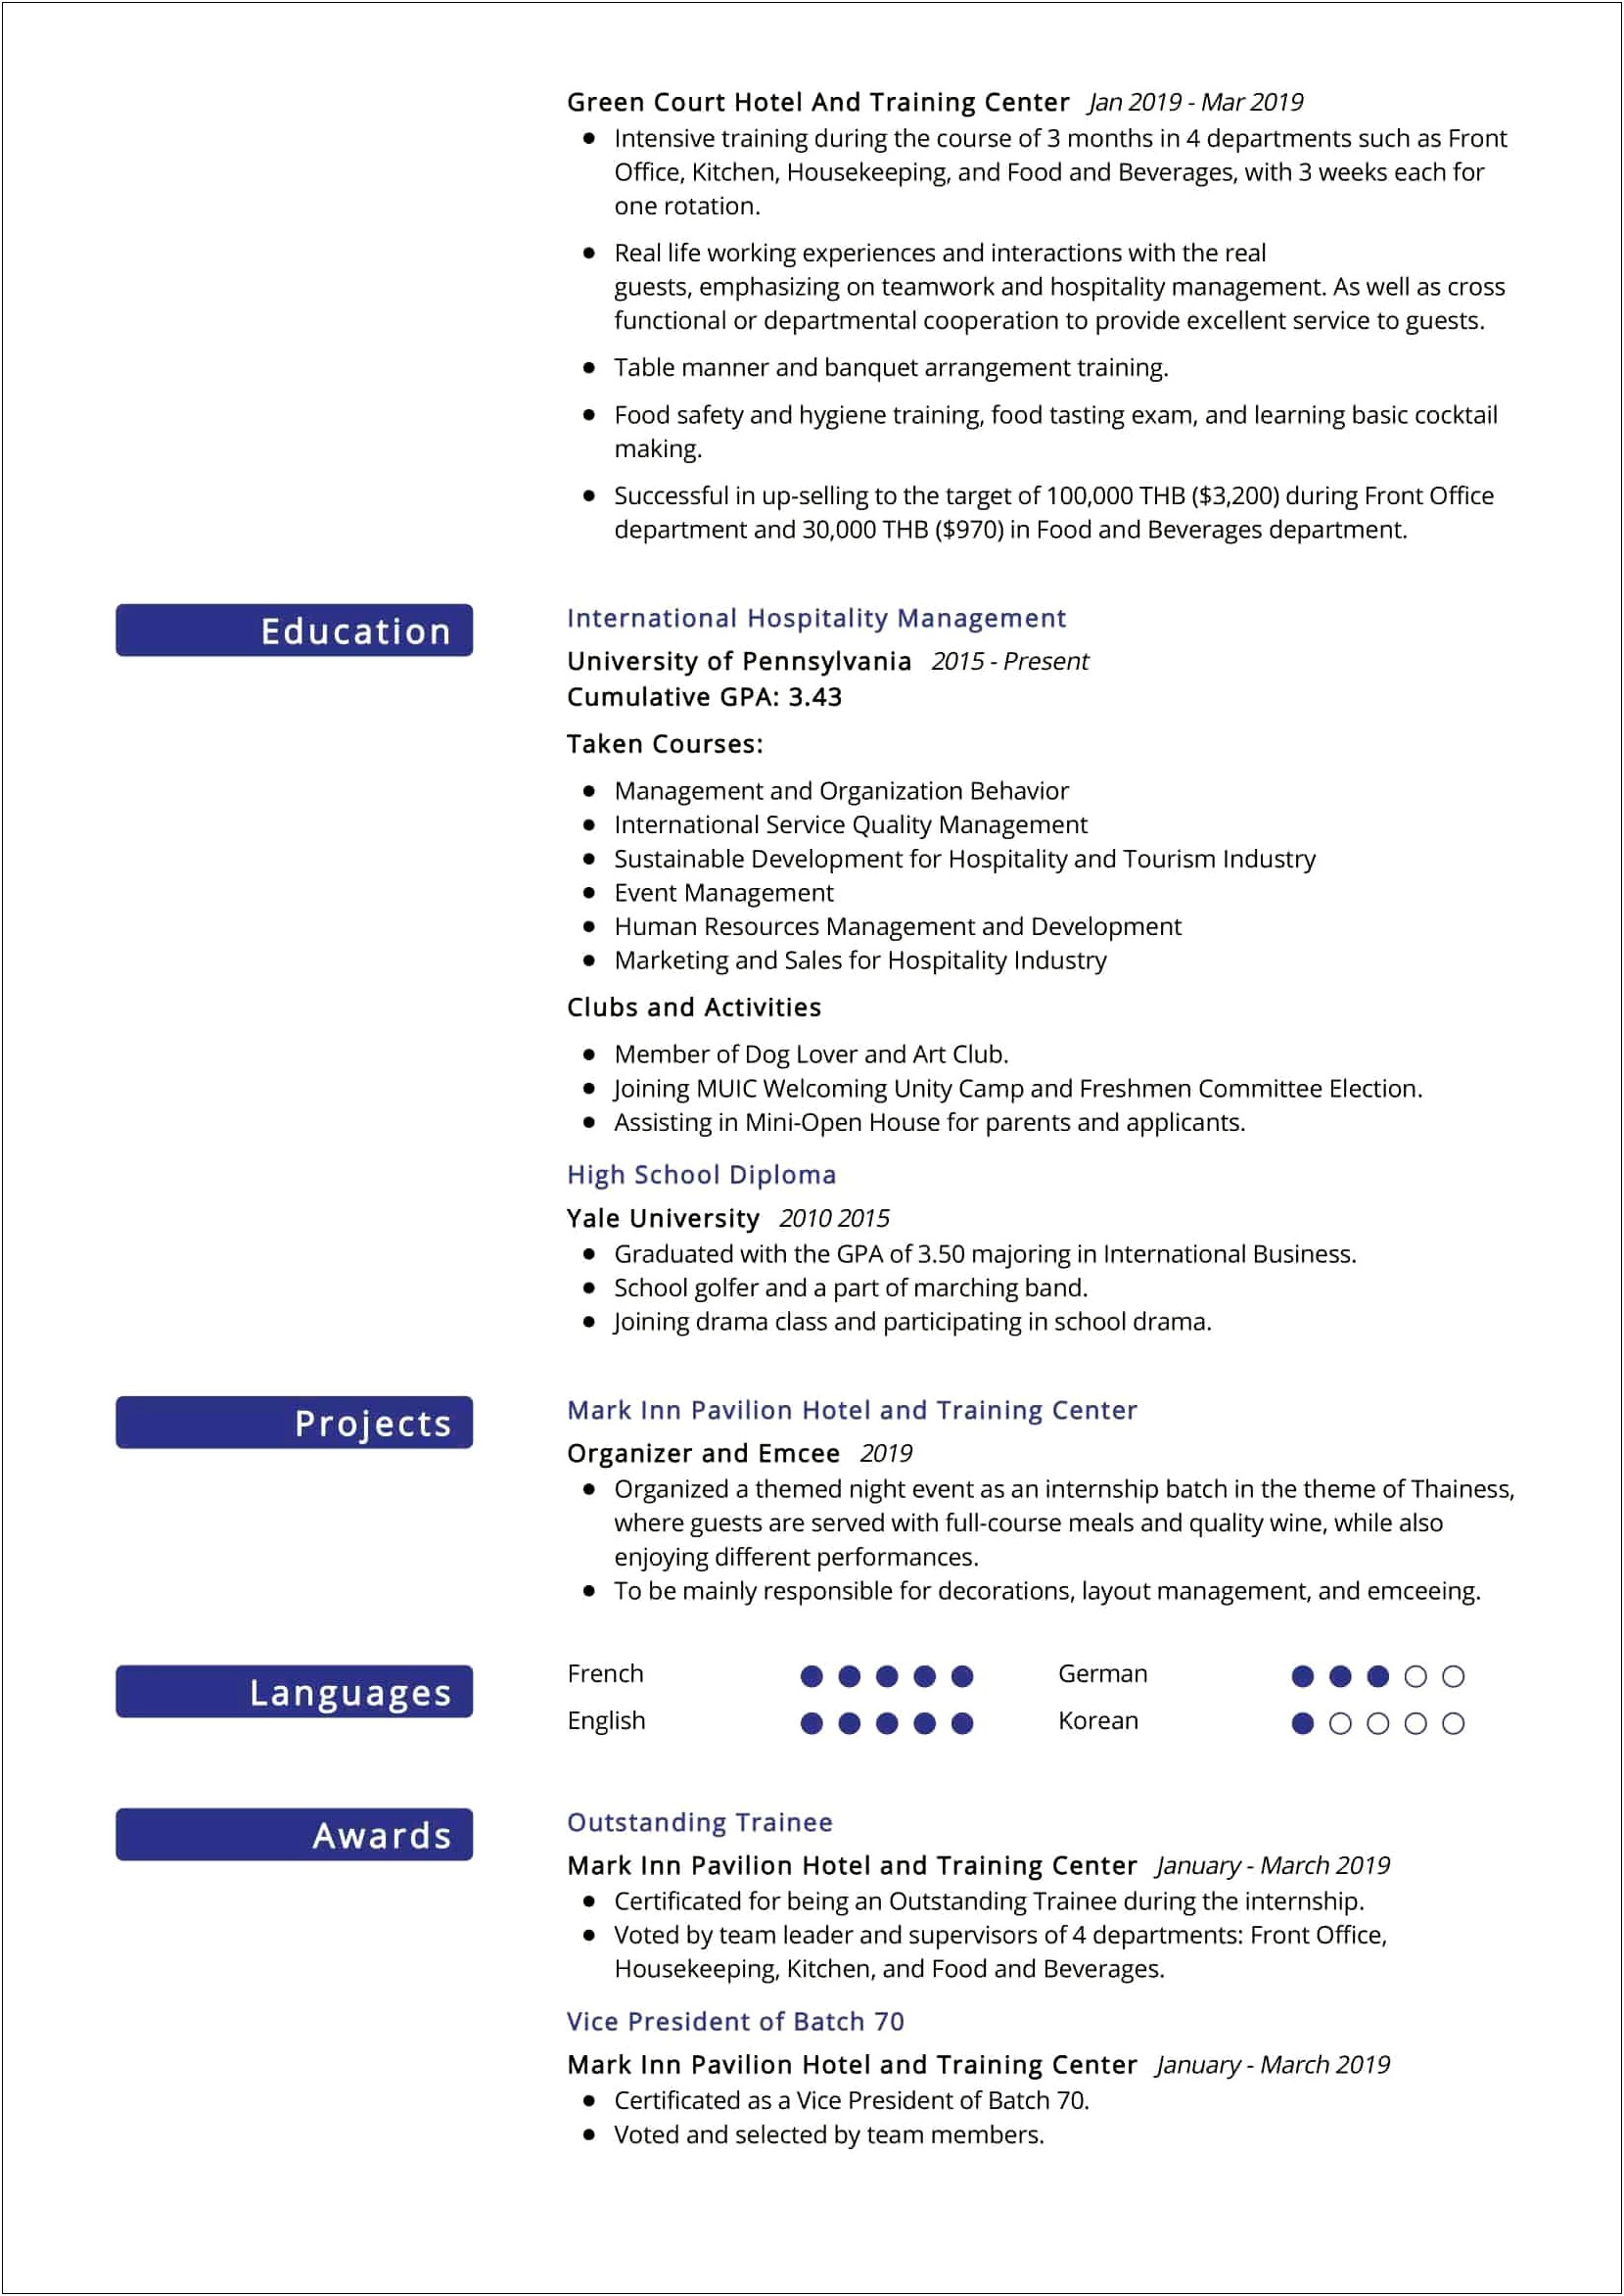 Resume Format For Hotel Duty Manager